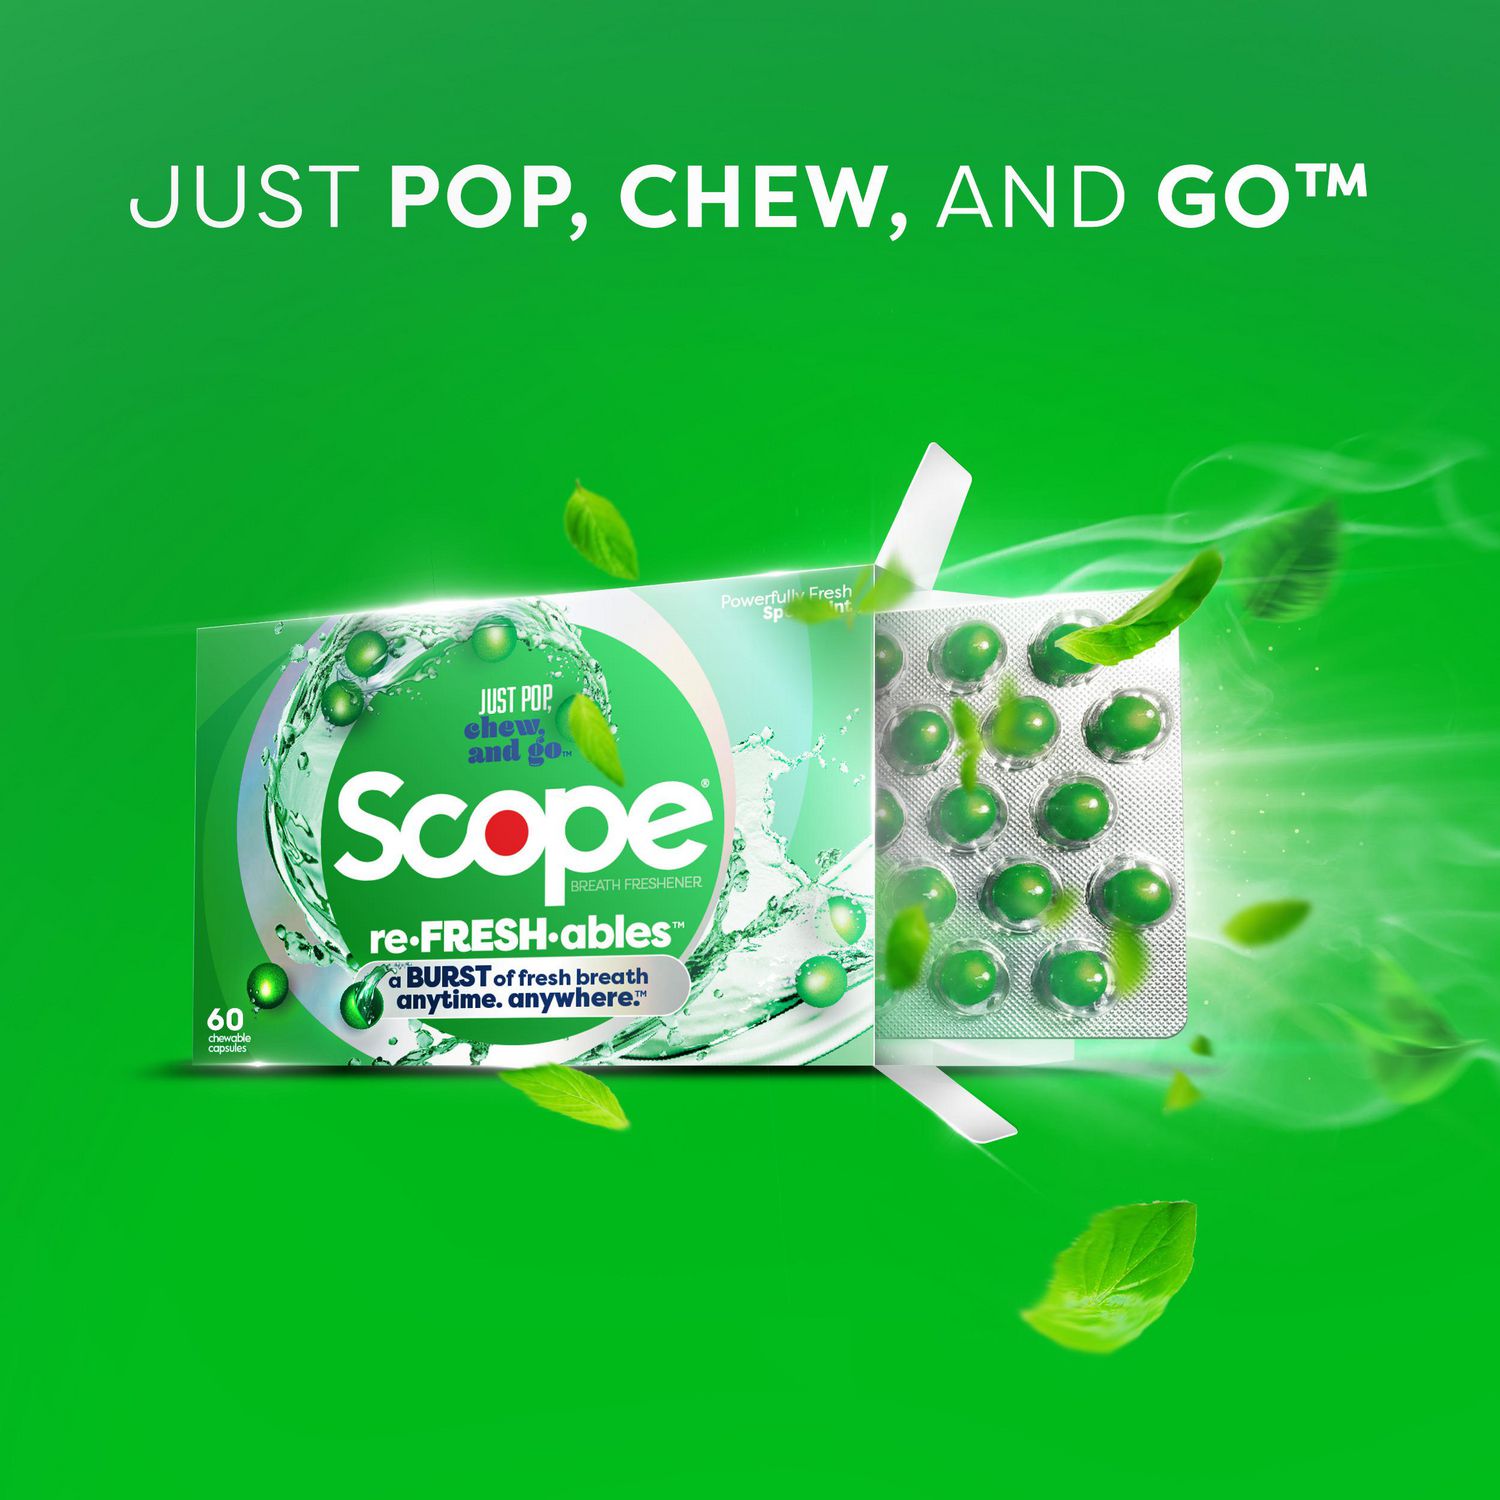 Scope Refreshables, Chewable Capsules to Freshen Breath, Spearmint 